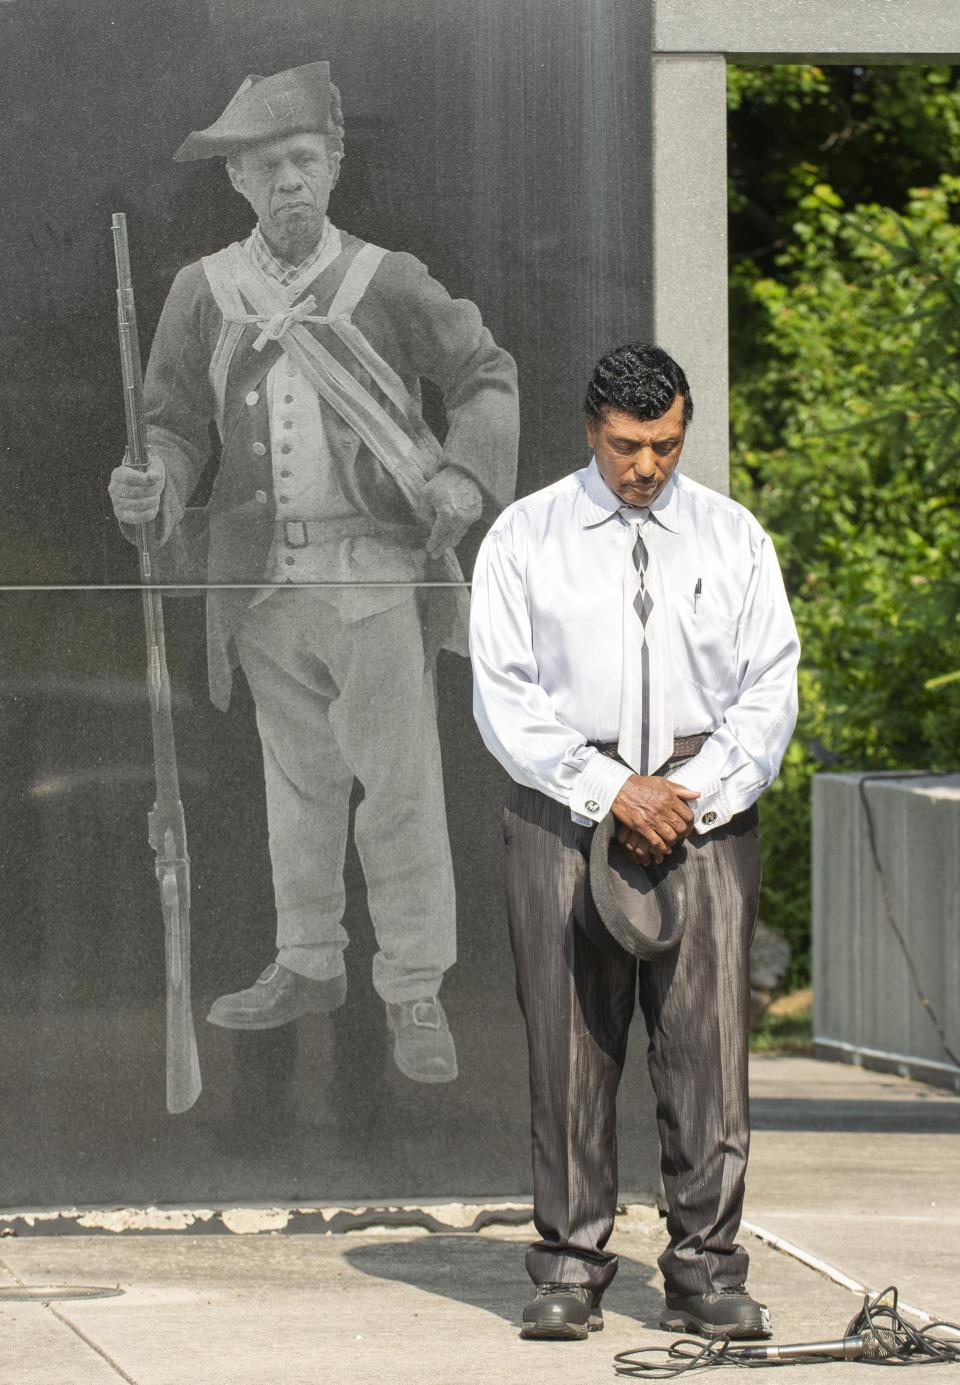 Jimmy Winters, president of the local chapter of the NAACP, stands in front of a monument dedicated to The Black Regiment at Patriots Park in Portsmouth.